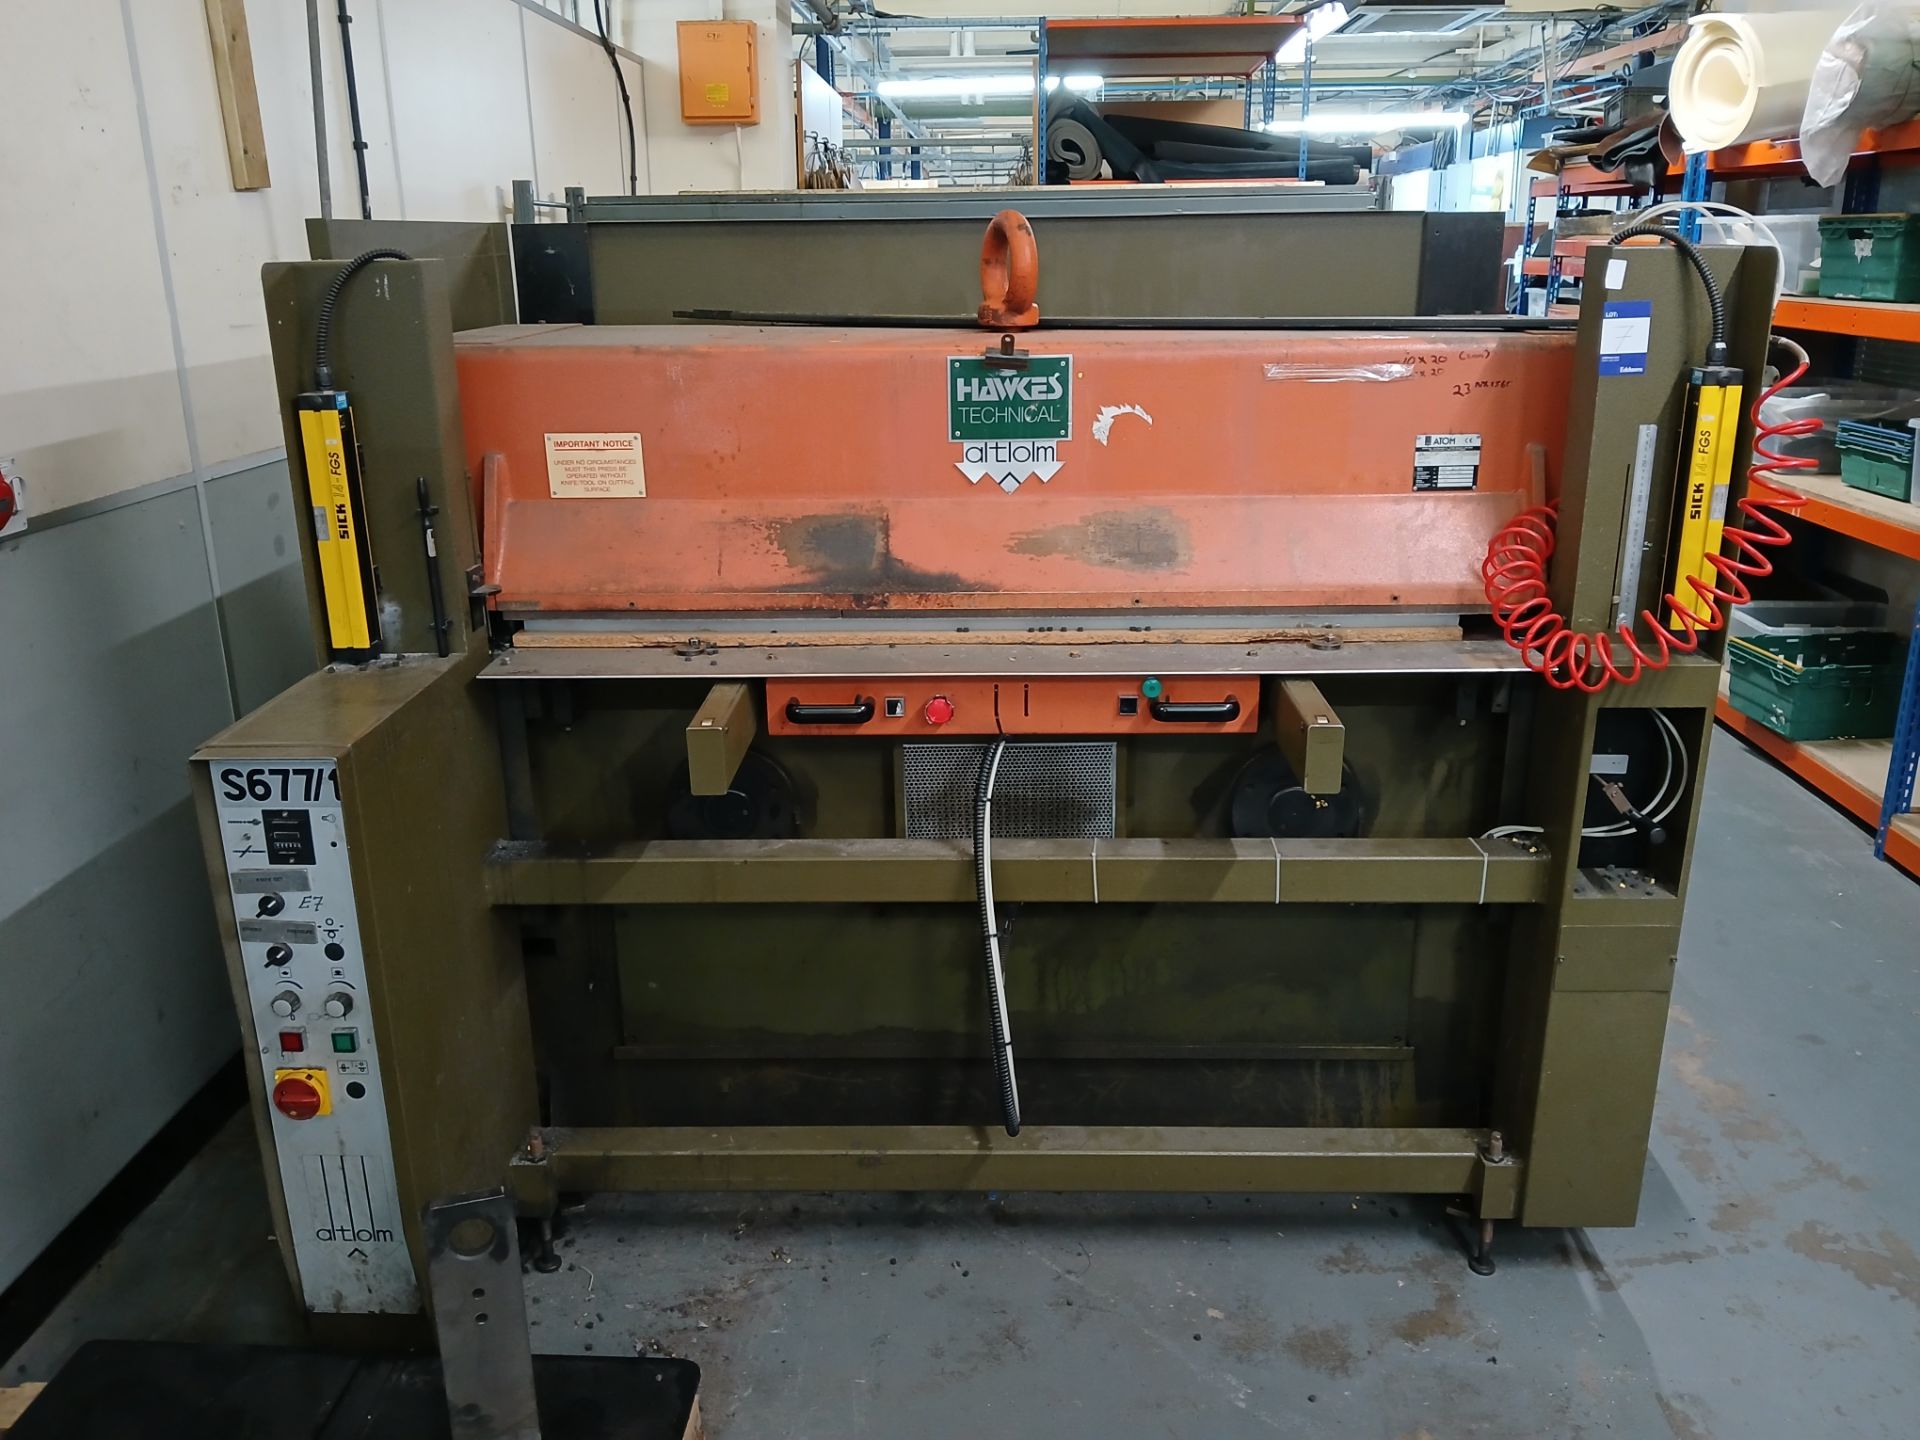 Atom 5677/1 Press Serial number ZC580018 (1997) 1650mm capacity with side lightguards, overall - Image 2 of 8